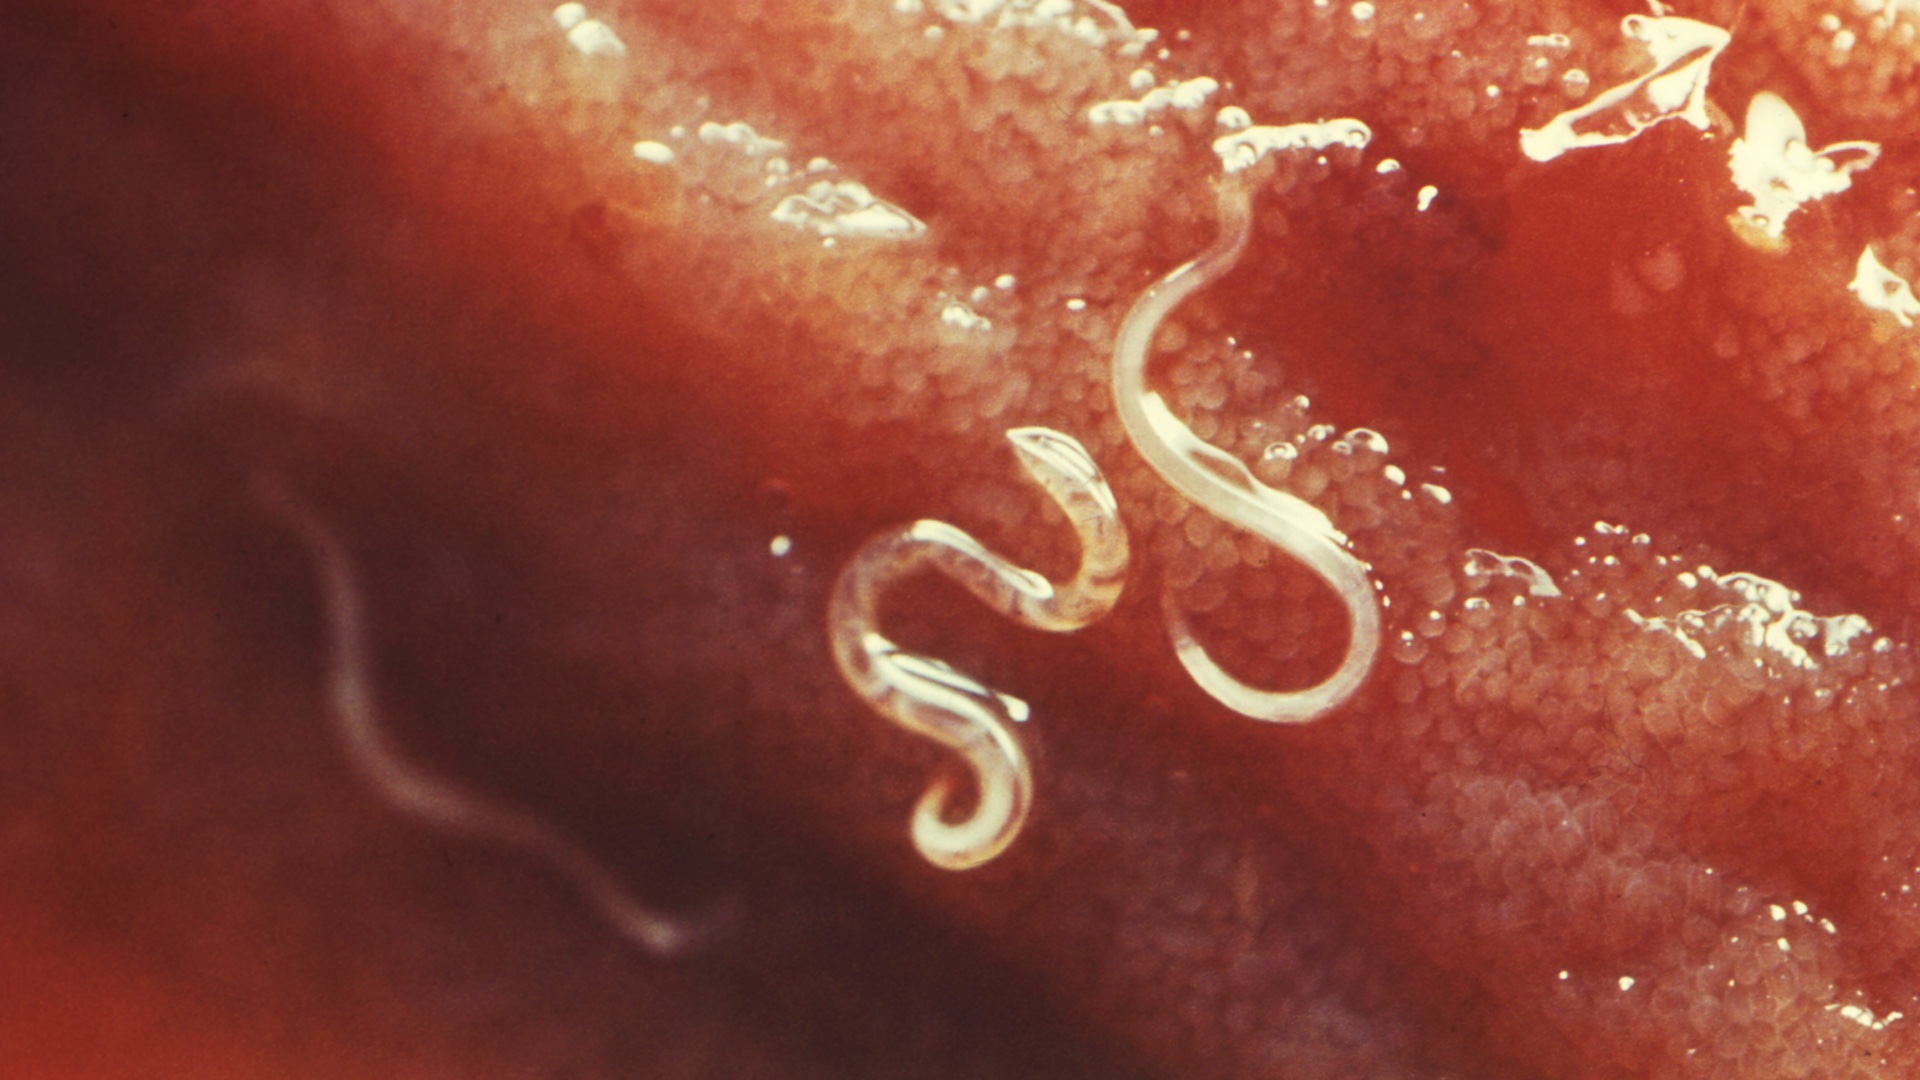 This photograph depicts a close view of the small intestinal mucosa of a canine, revealing the presence of Ancylostoma caninum hookworms, atop the intestinal villi.